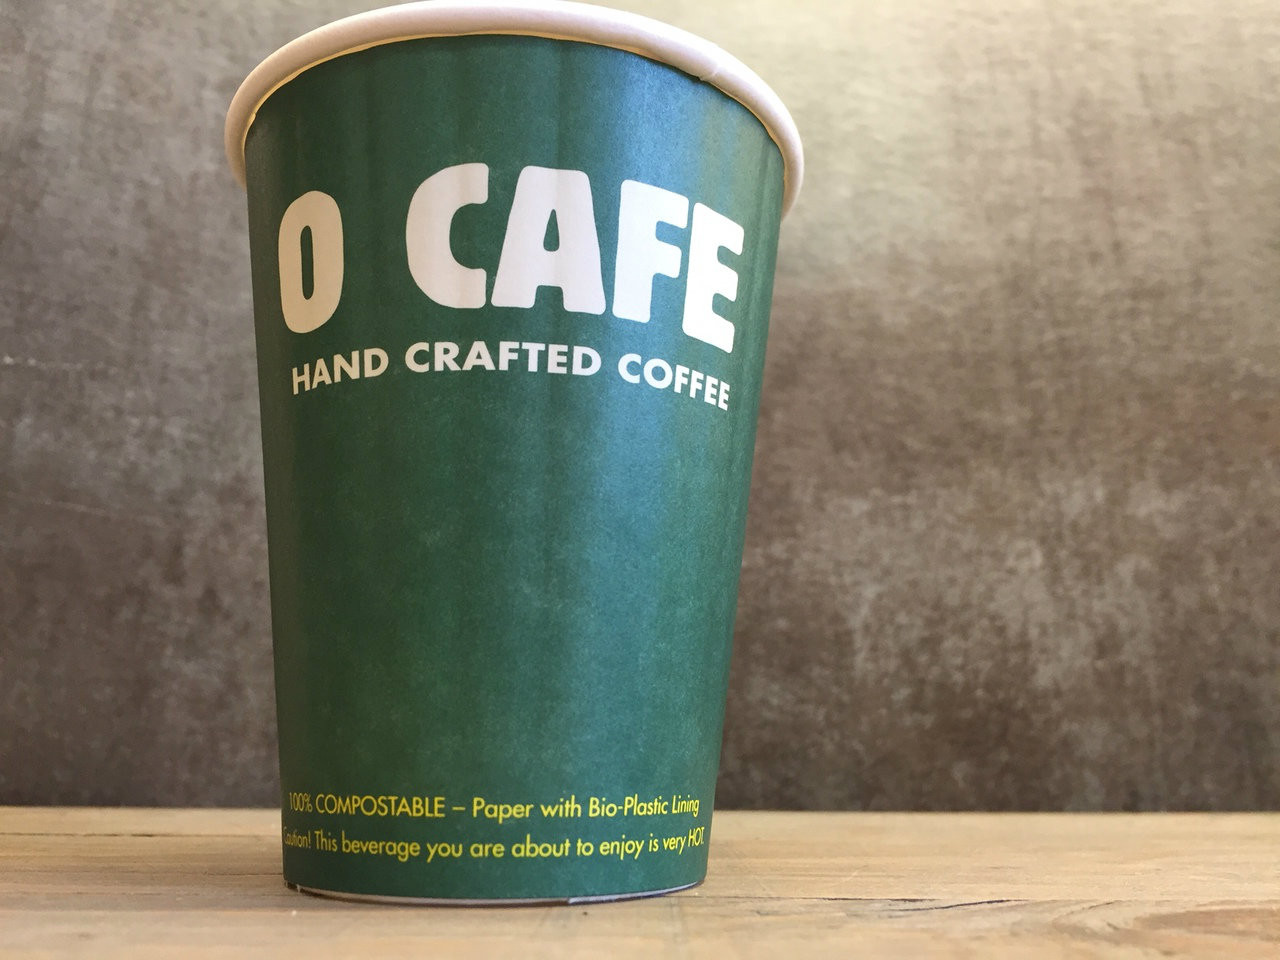  6 oz Paper Cups for Coffee and Tea - Decorated Office  Disposable Water Paper Cups : Health & Household